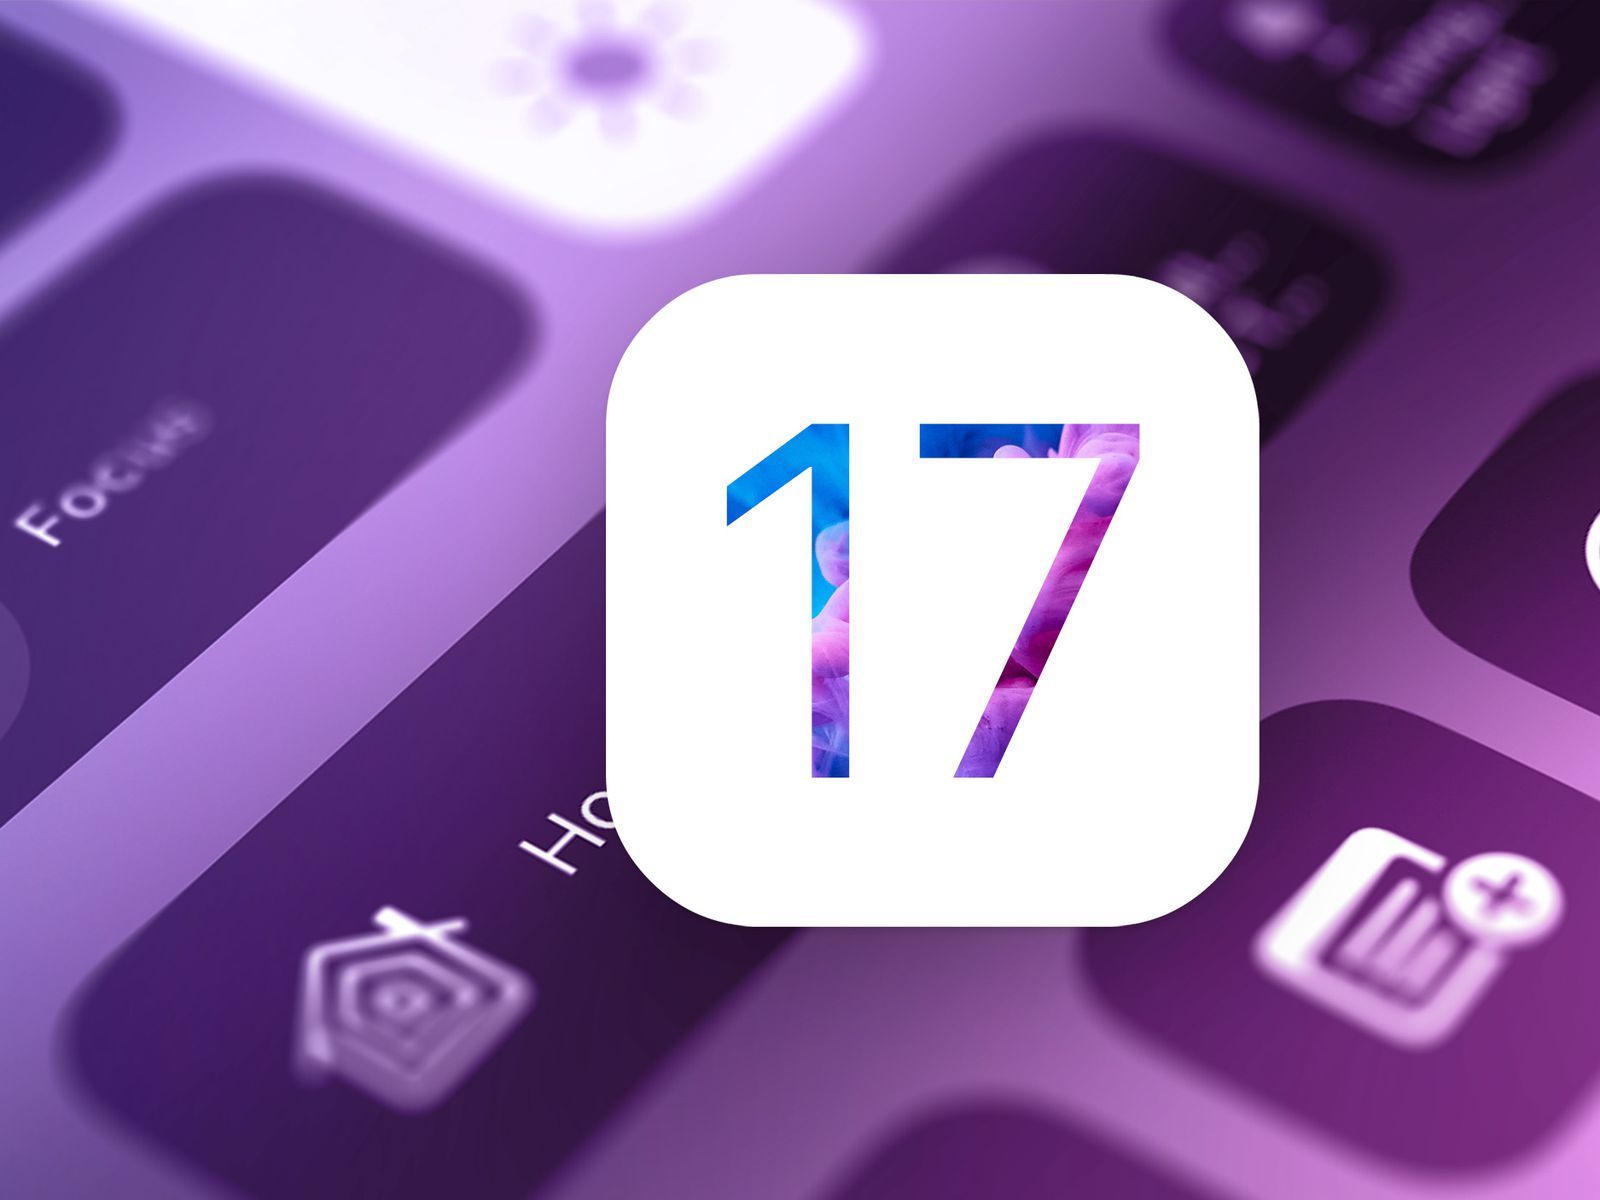 This iOS 17 leak shows big changes to key iPhone apps